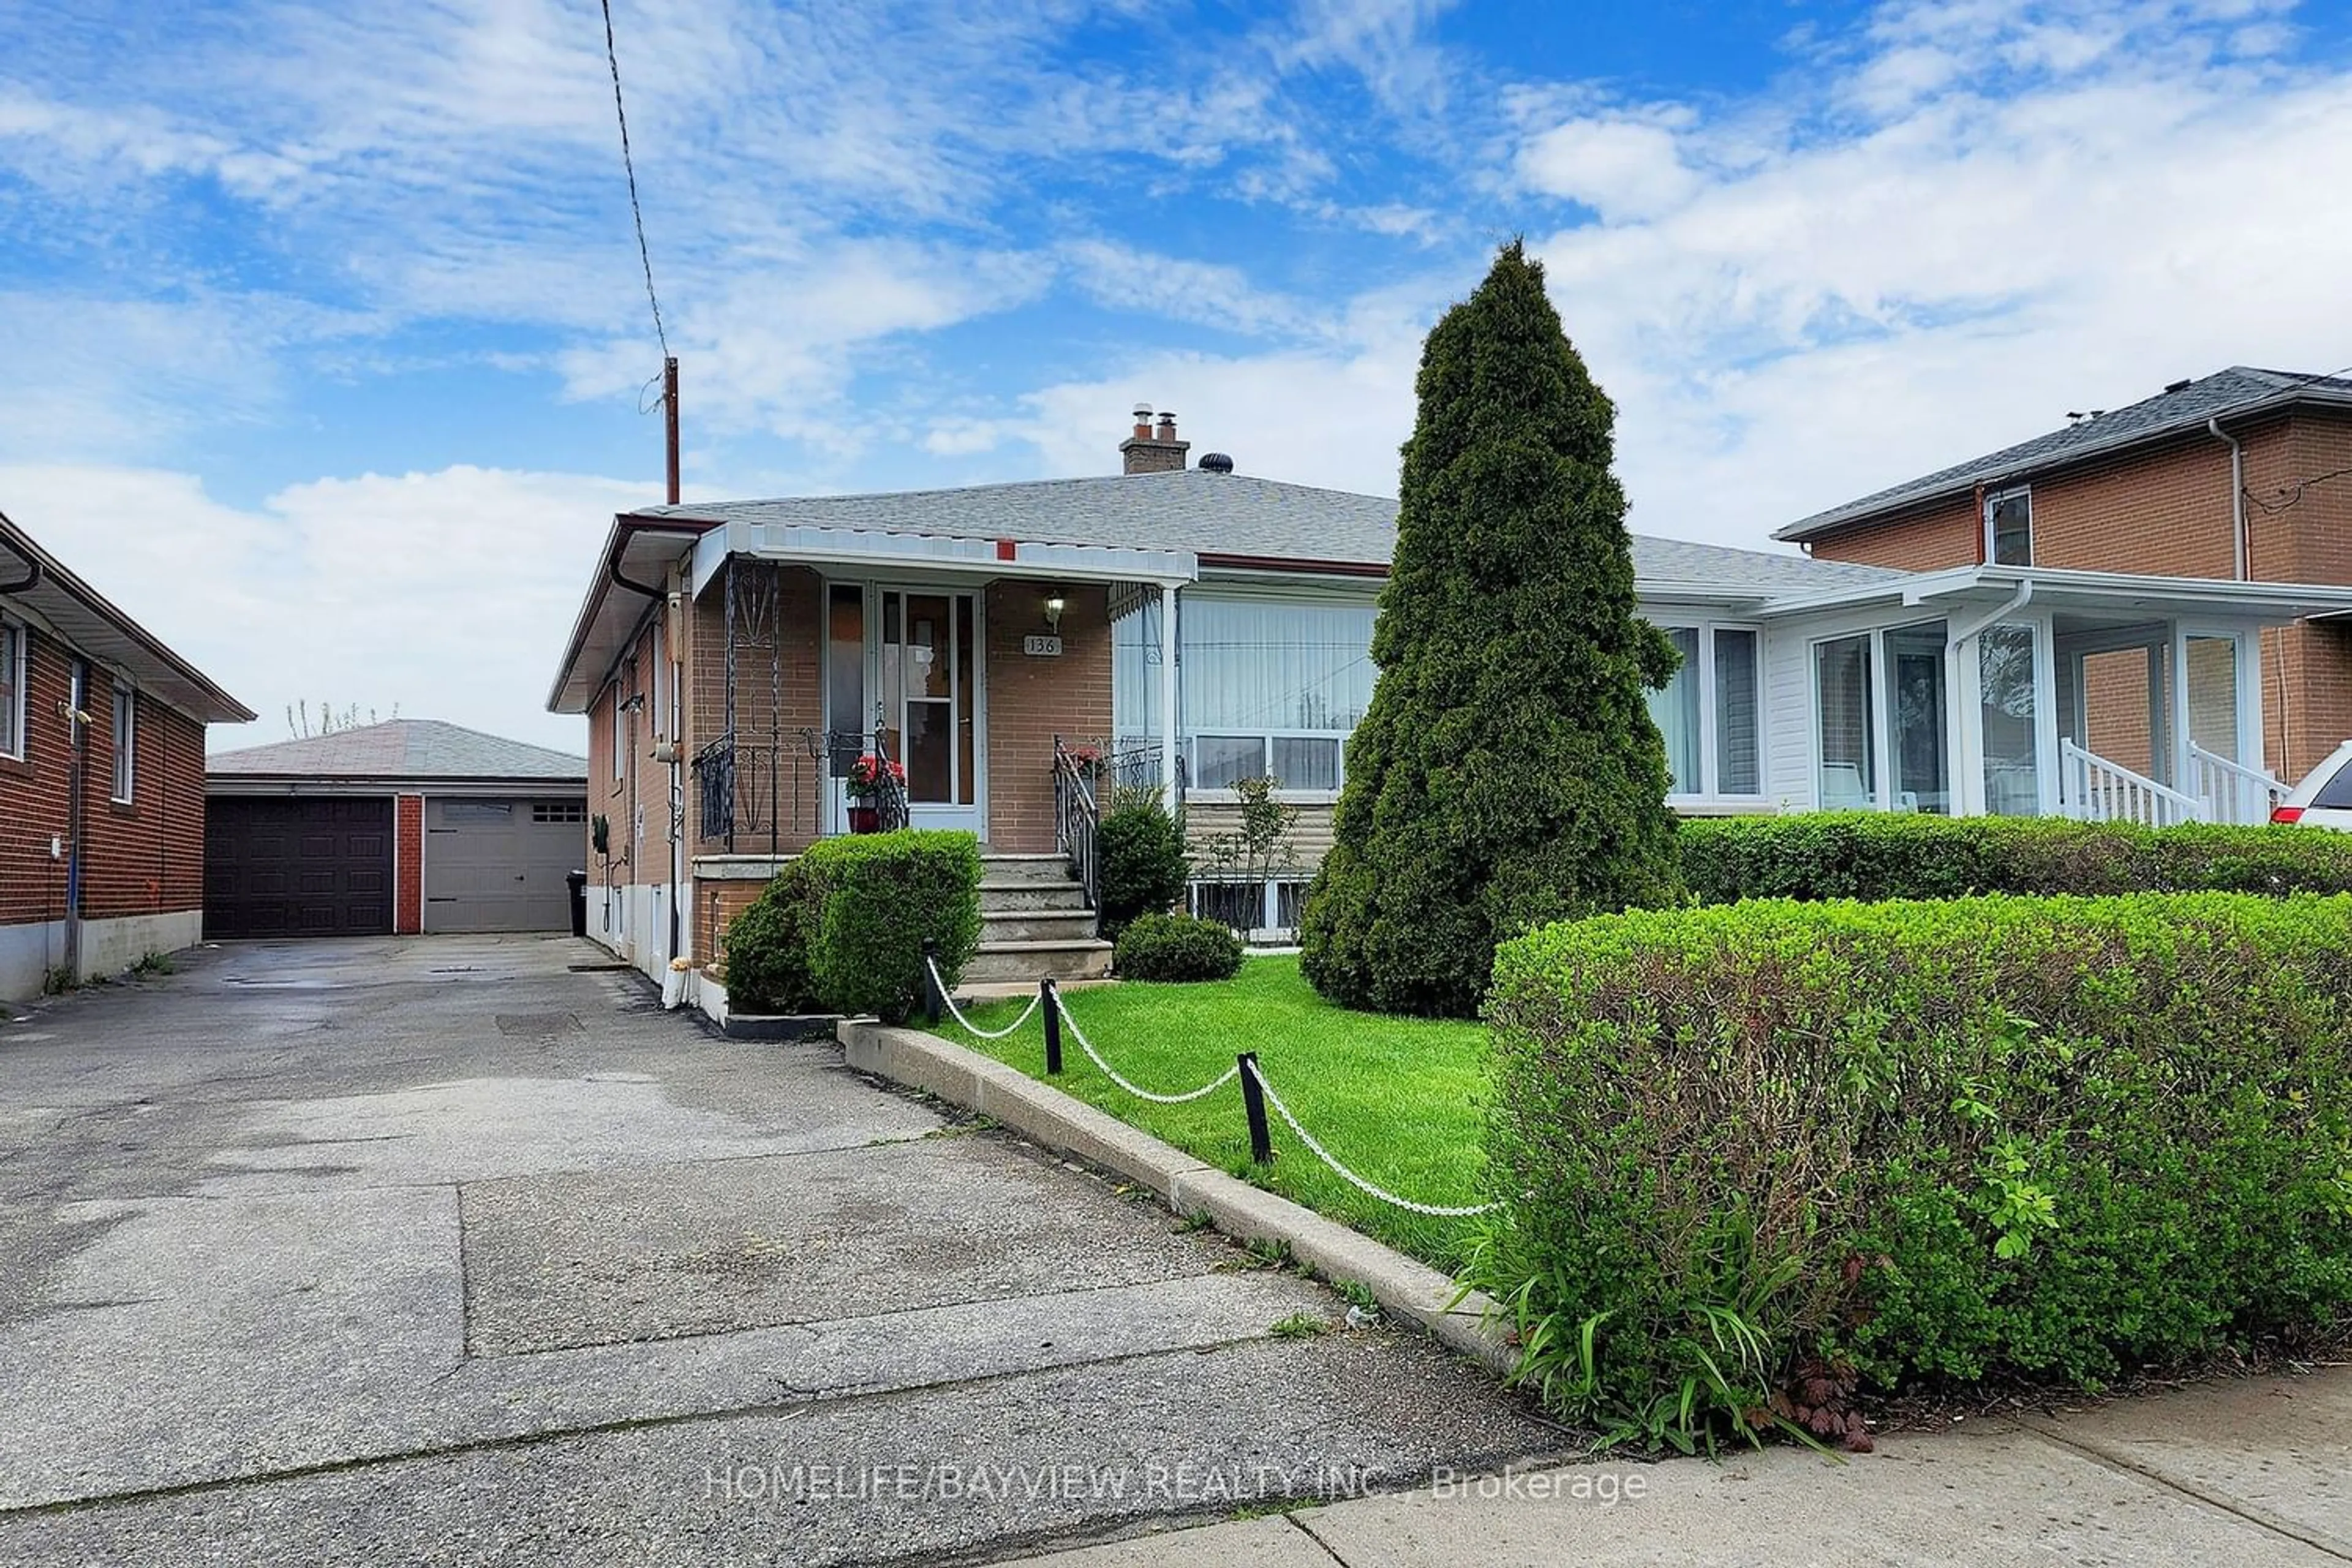 Frontside or backside of a home for 136 Chalkfarm Dr, Toronto Ontario M3L 1L6